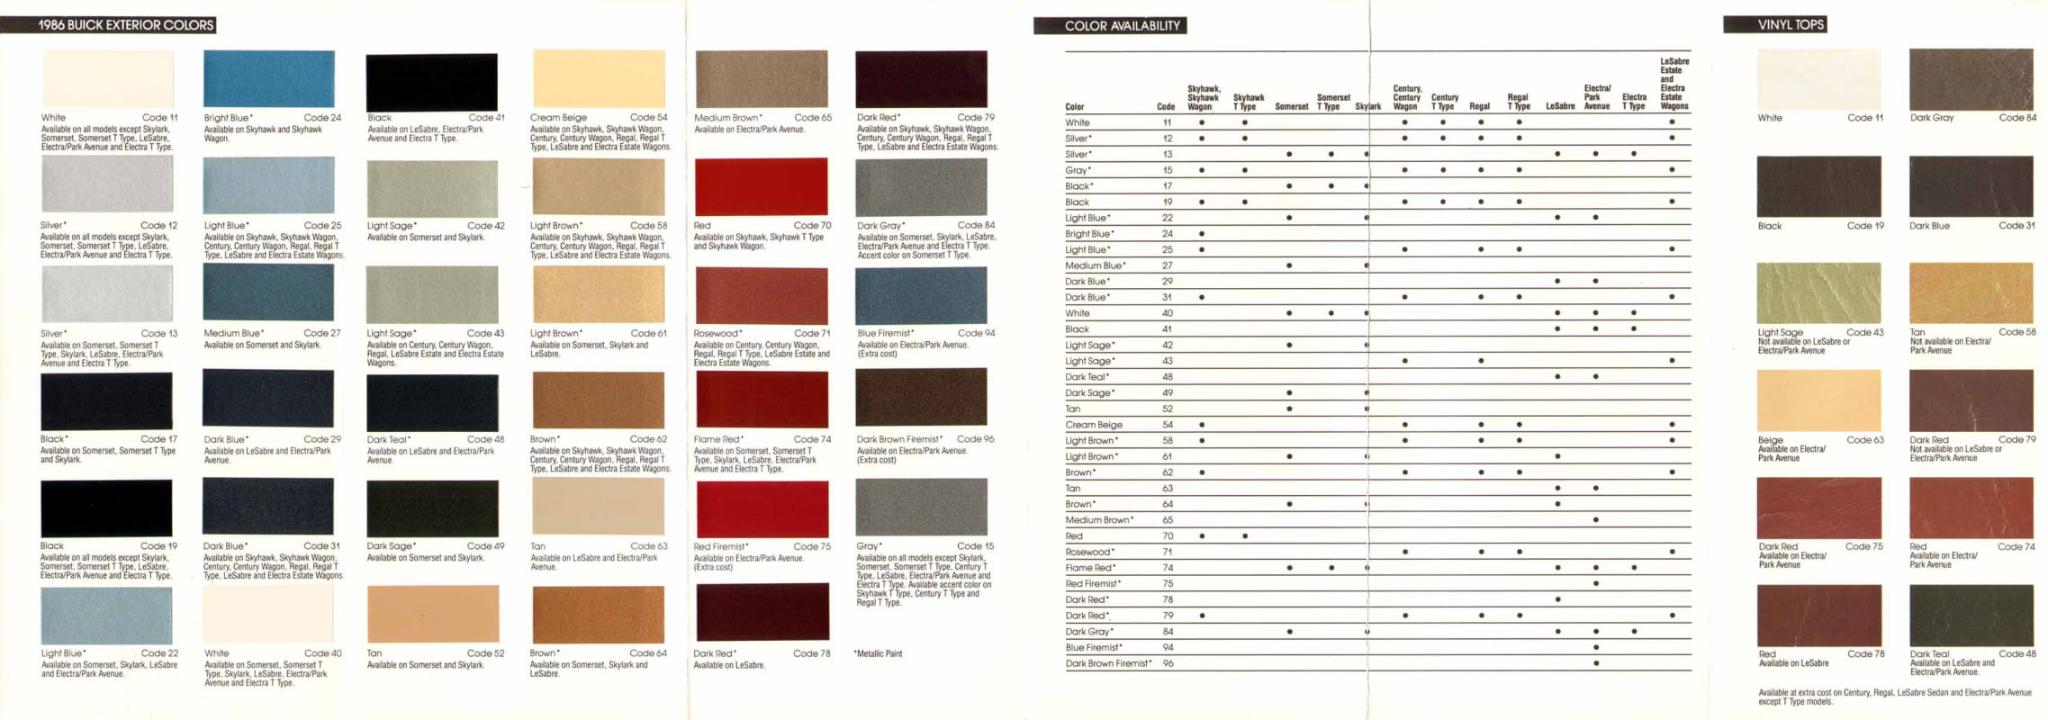 General Motors oem paint swatches, color codes and color names for 1986 vehicles.